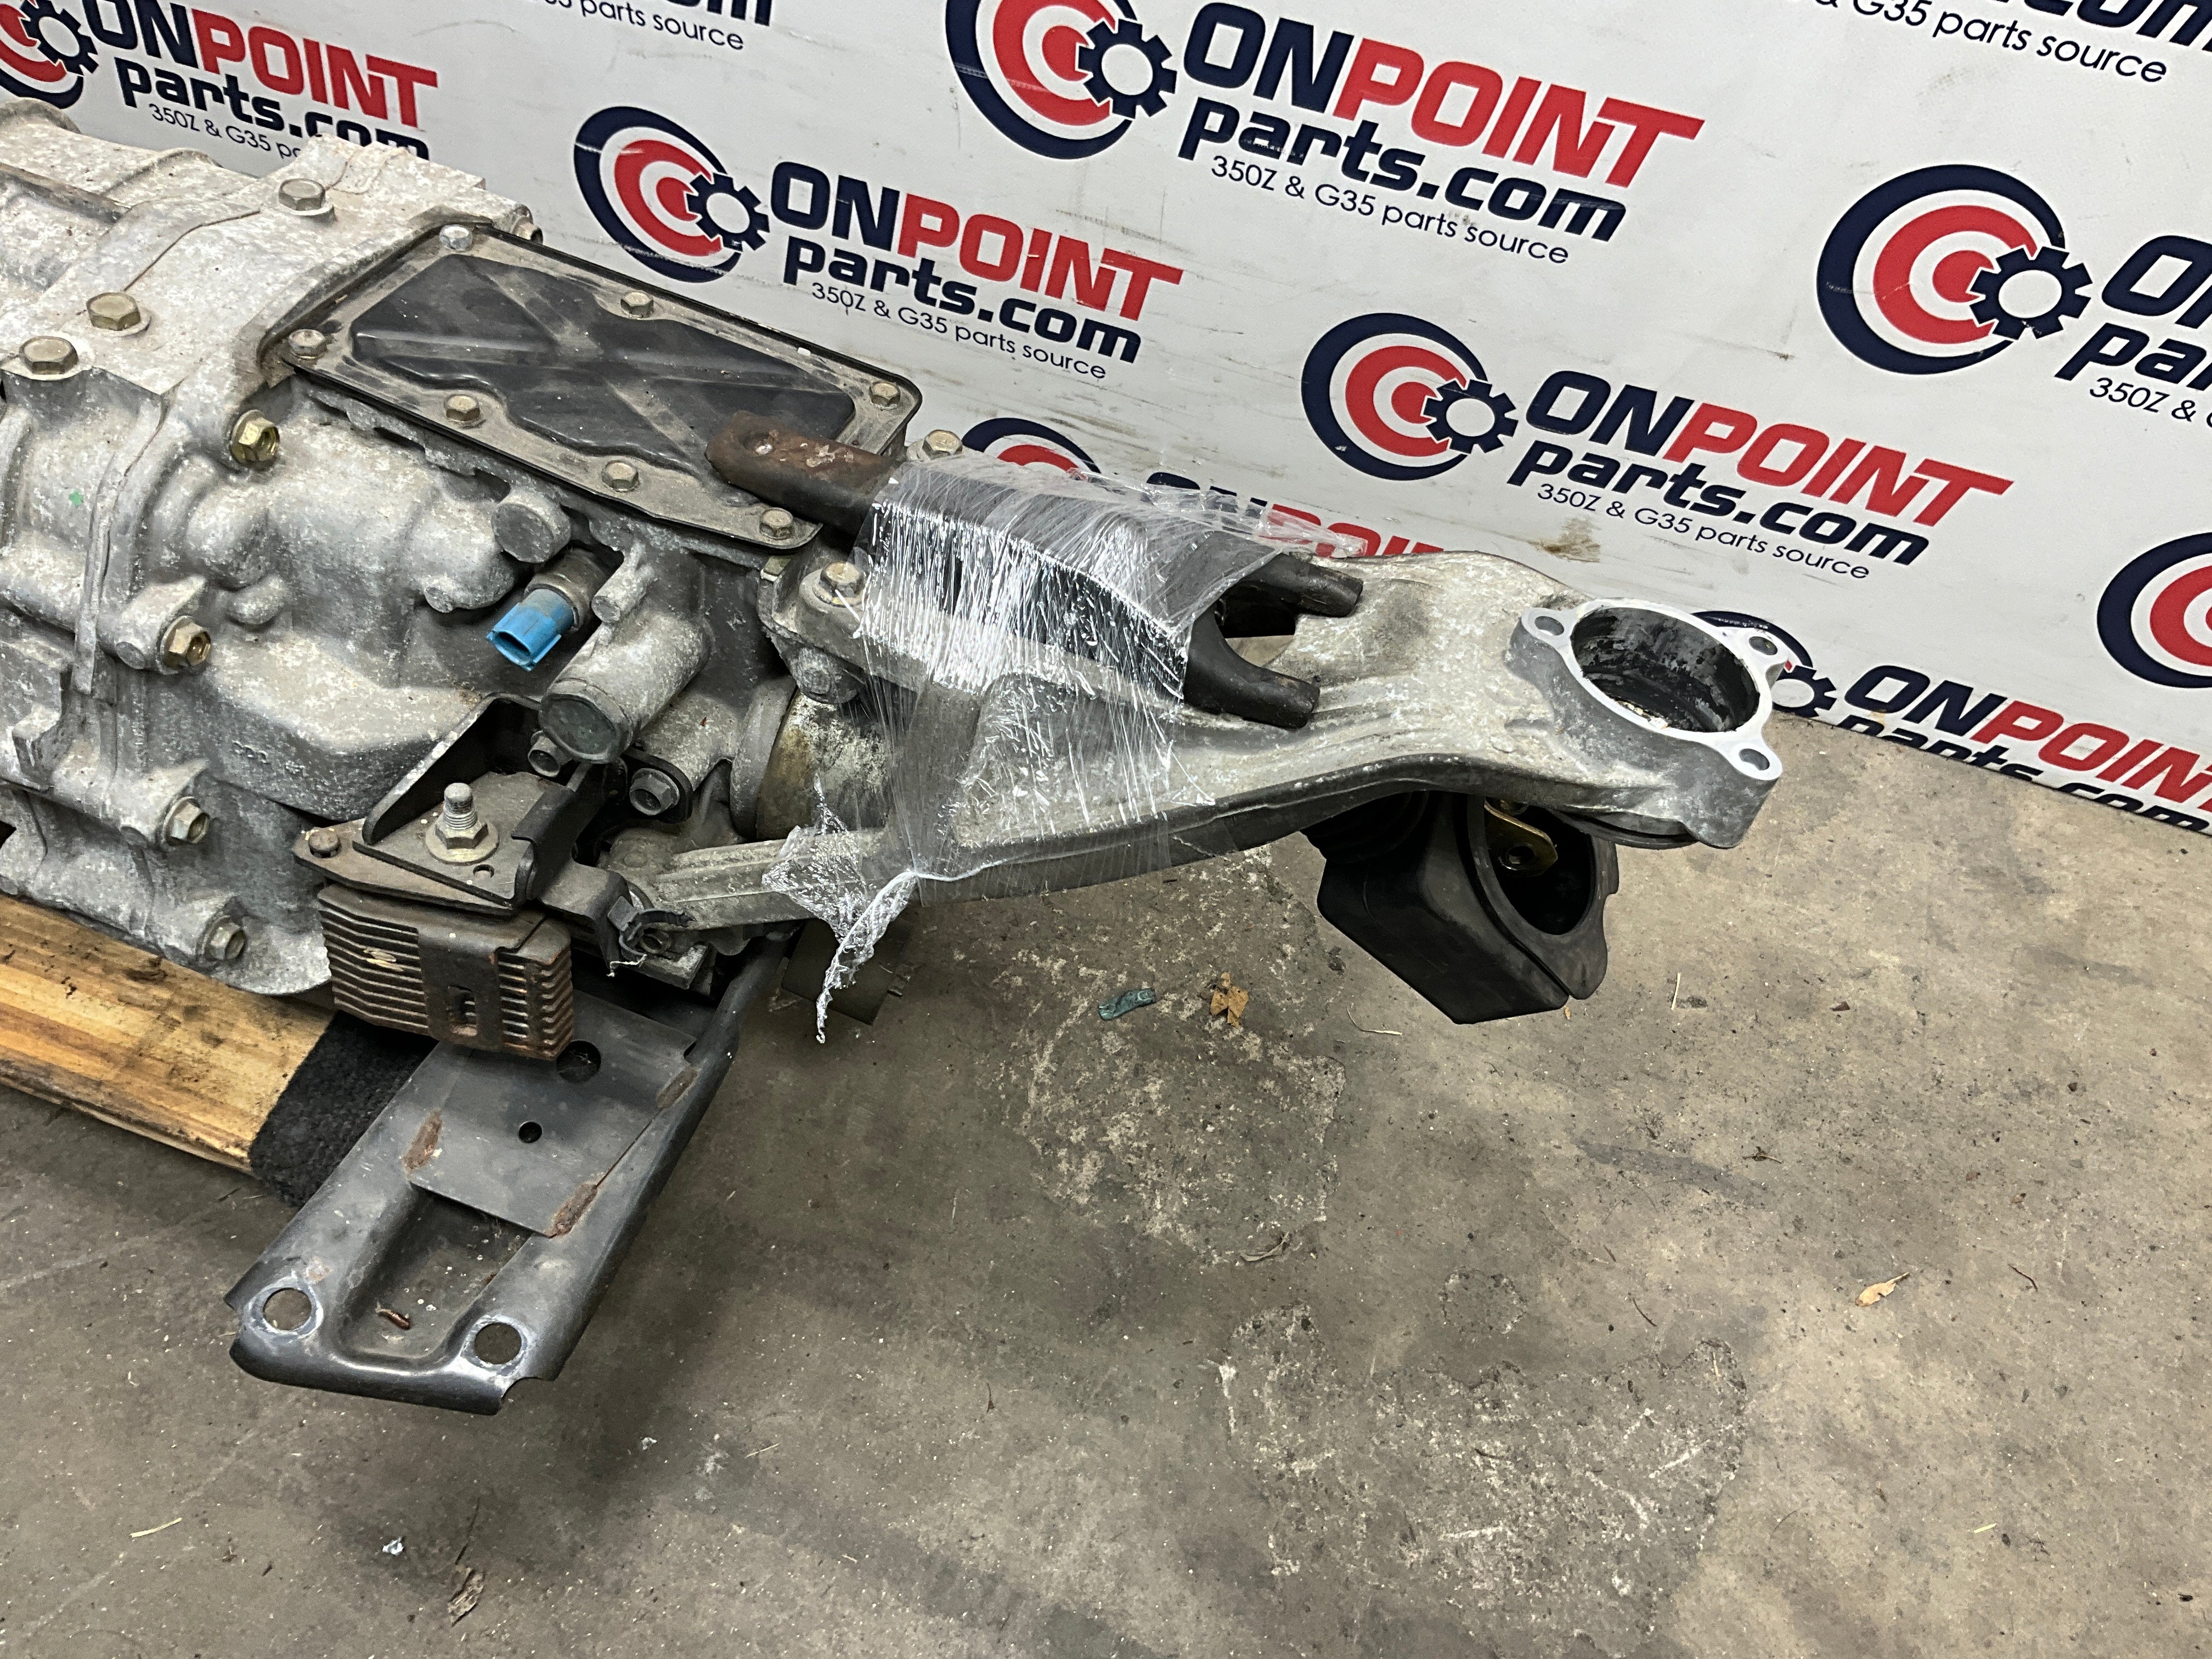 Transmission Parts – On Point Parts Inc